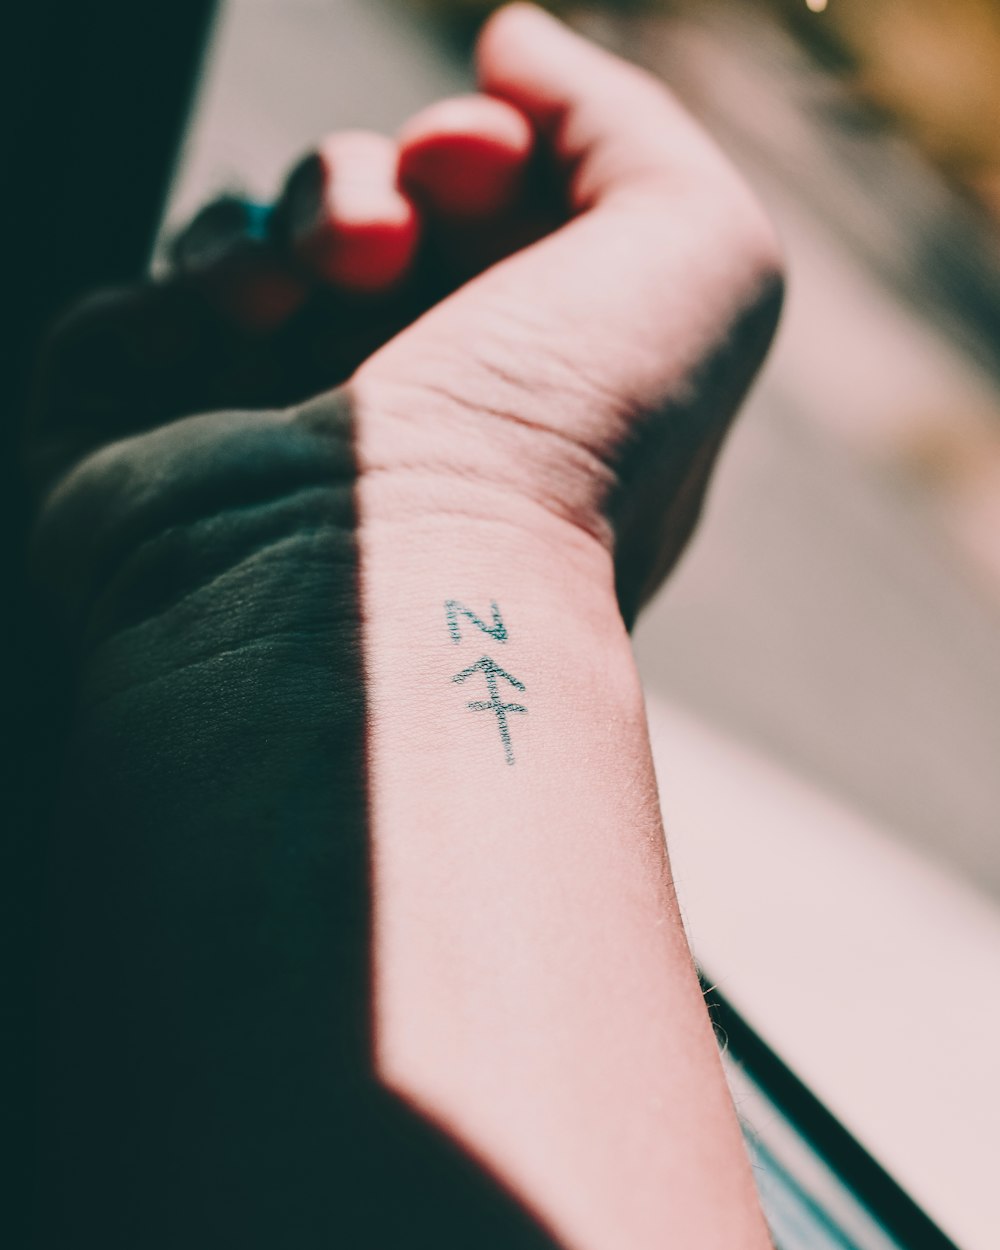 selective focus photography of person showing wrist tattoo